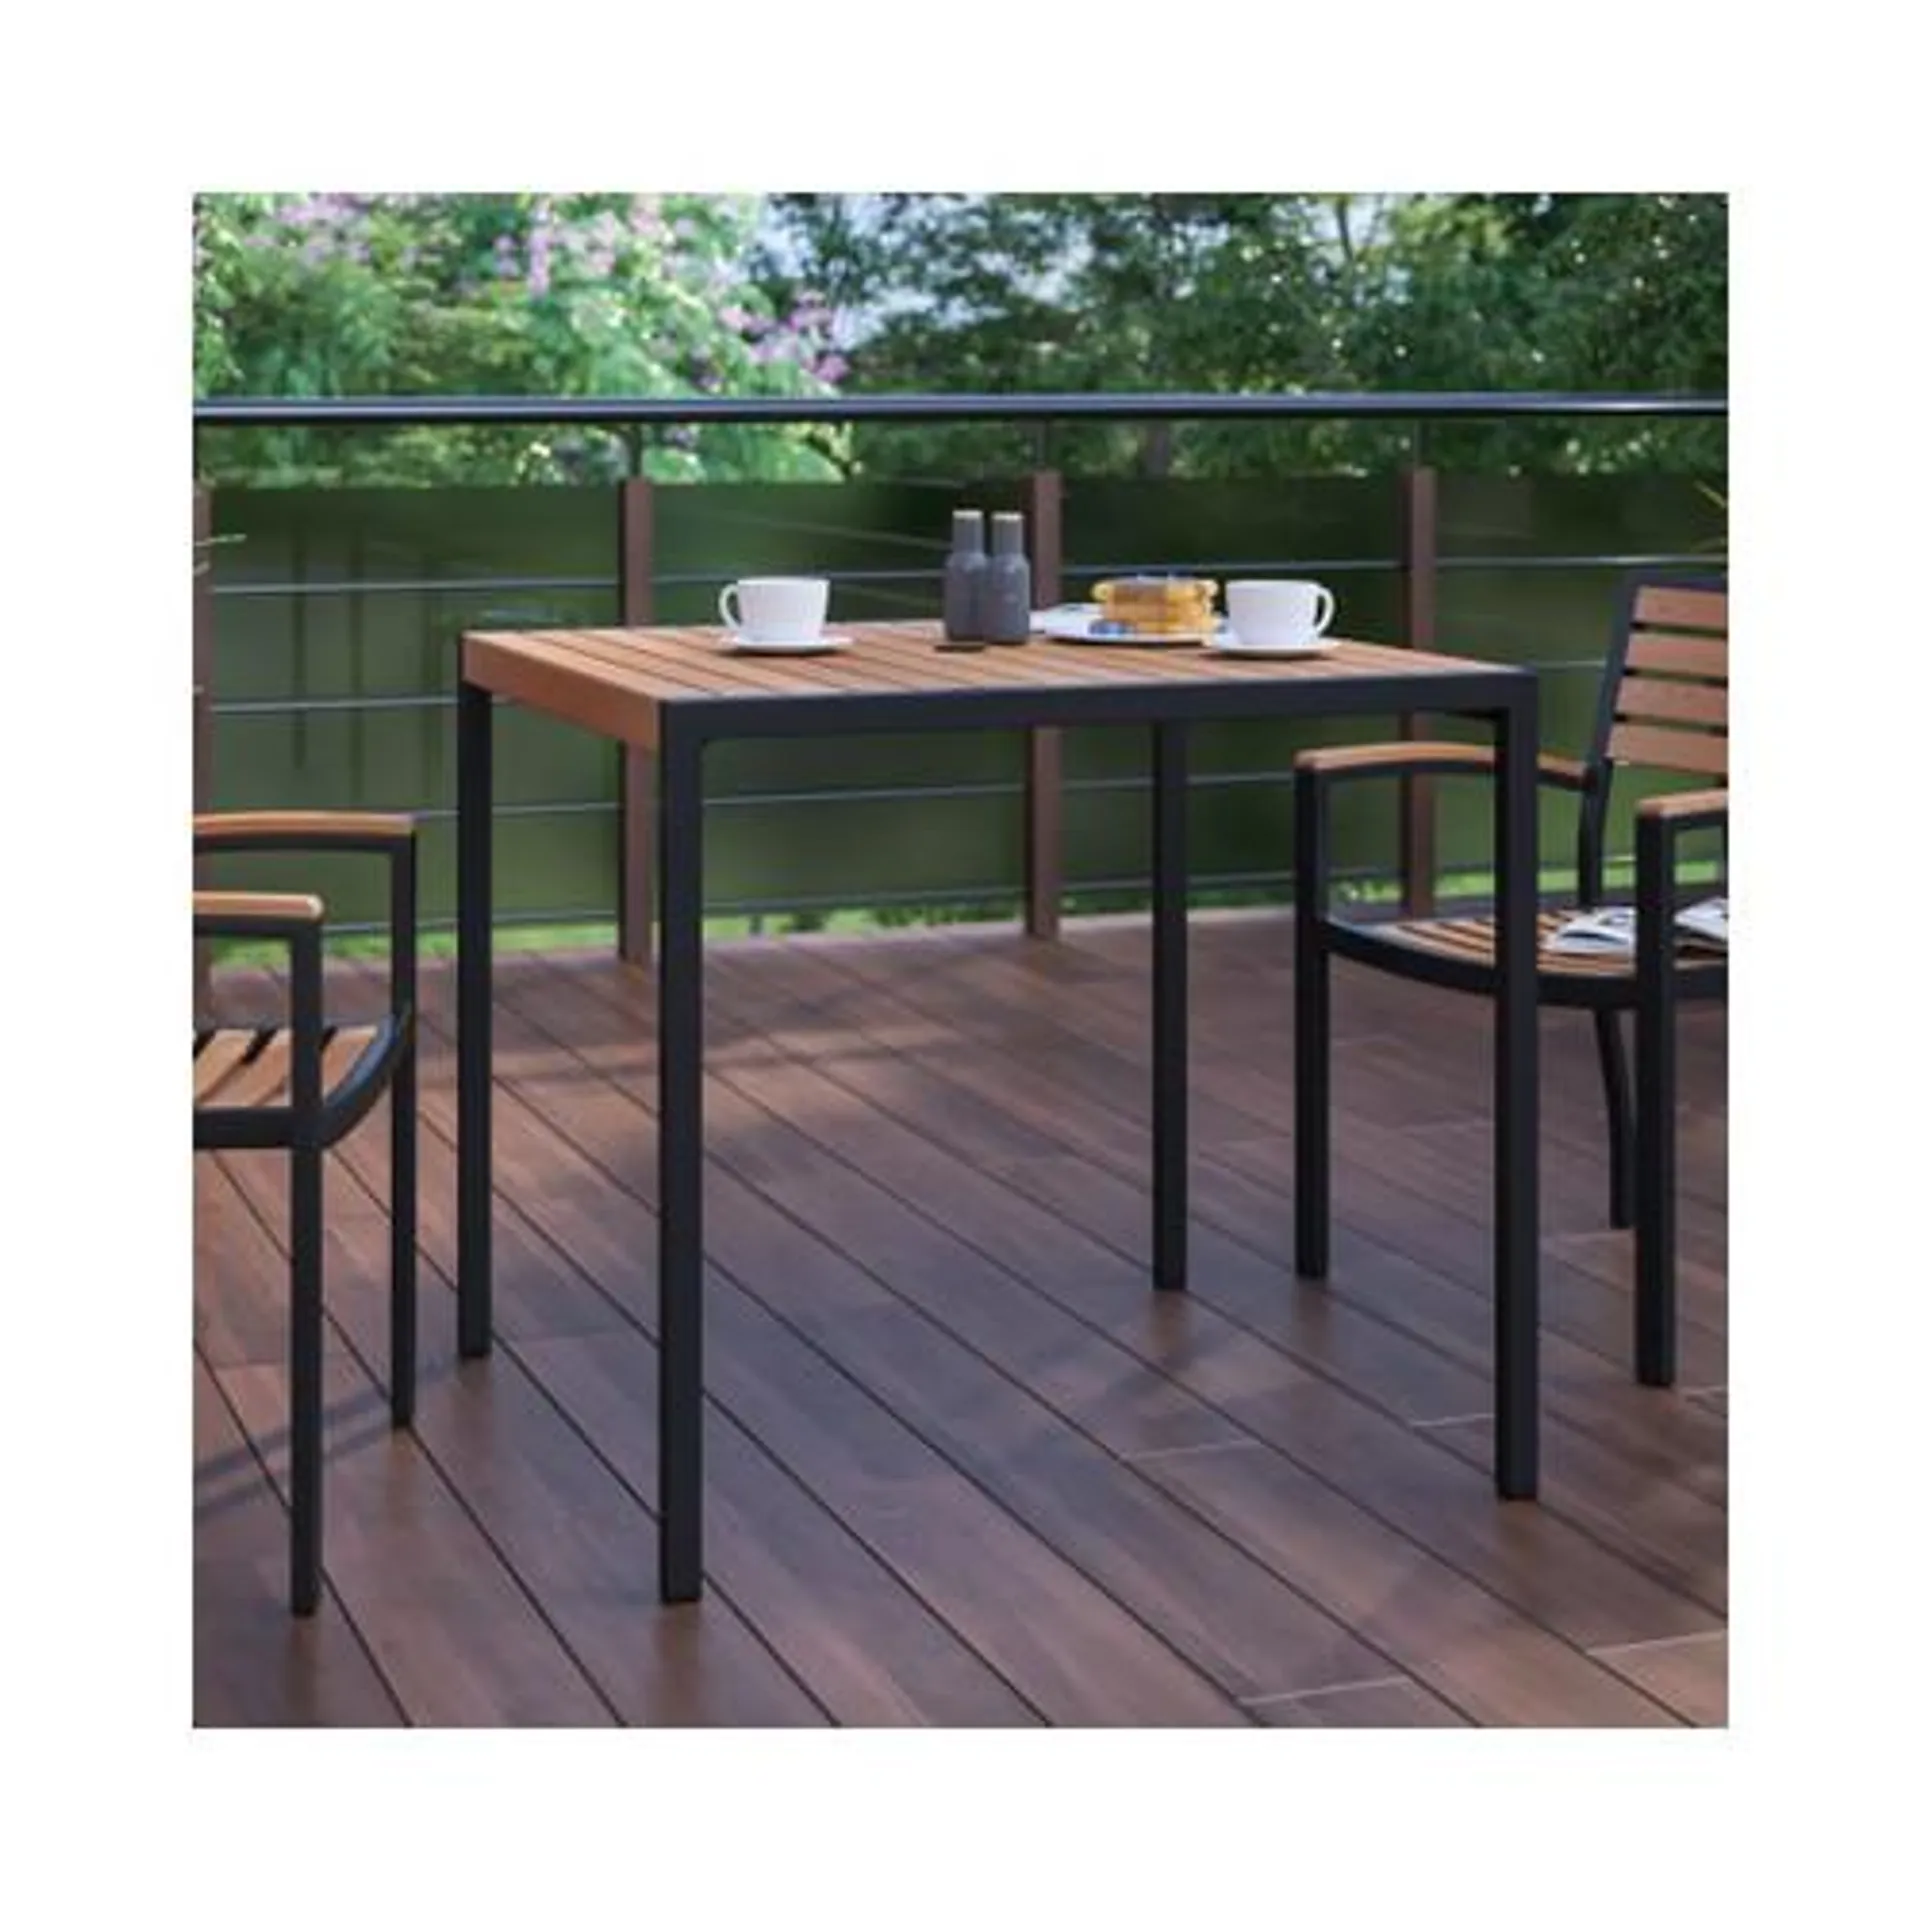 Outdoor Dining Table with Synthetic Teak Poly Slats - 35√¢‚Ç¨¬ù Square Steel Framed Restaurant Table with Umbrella Holder Hole - XUDGUH8100GG